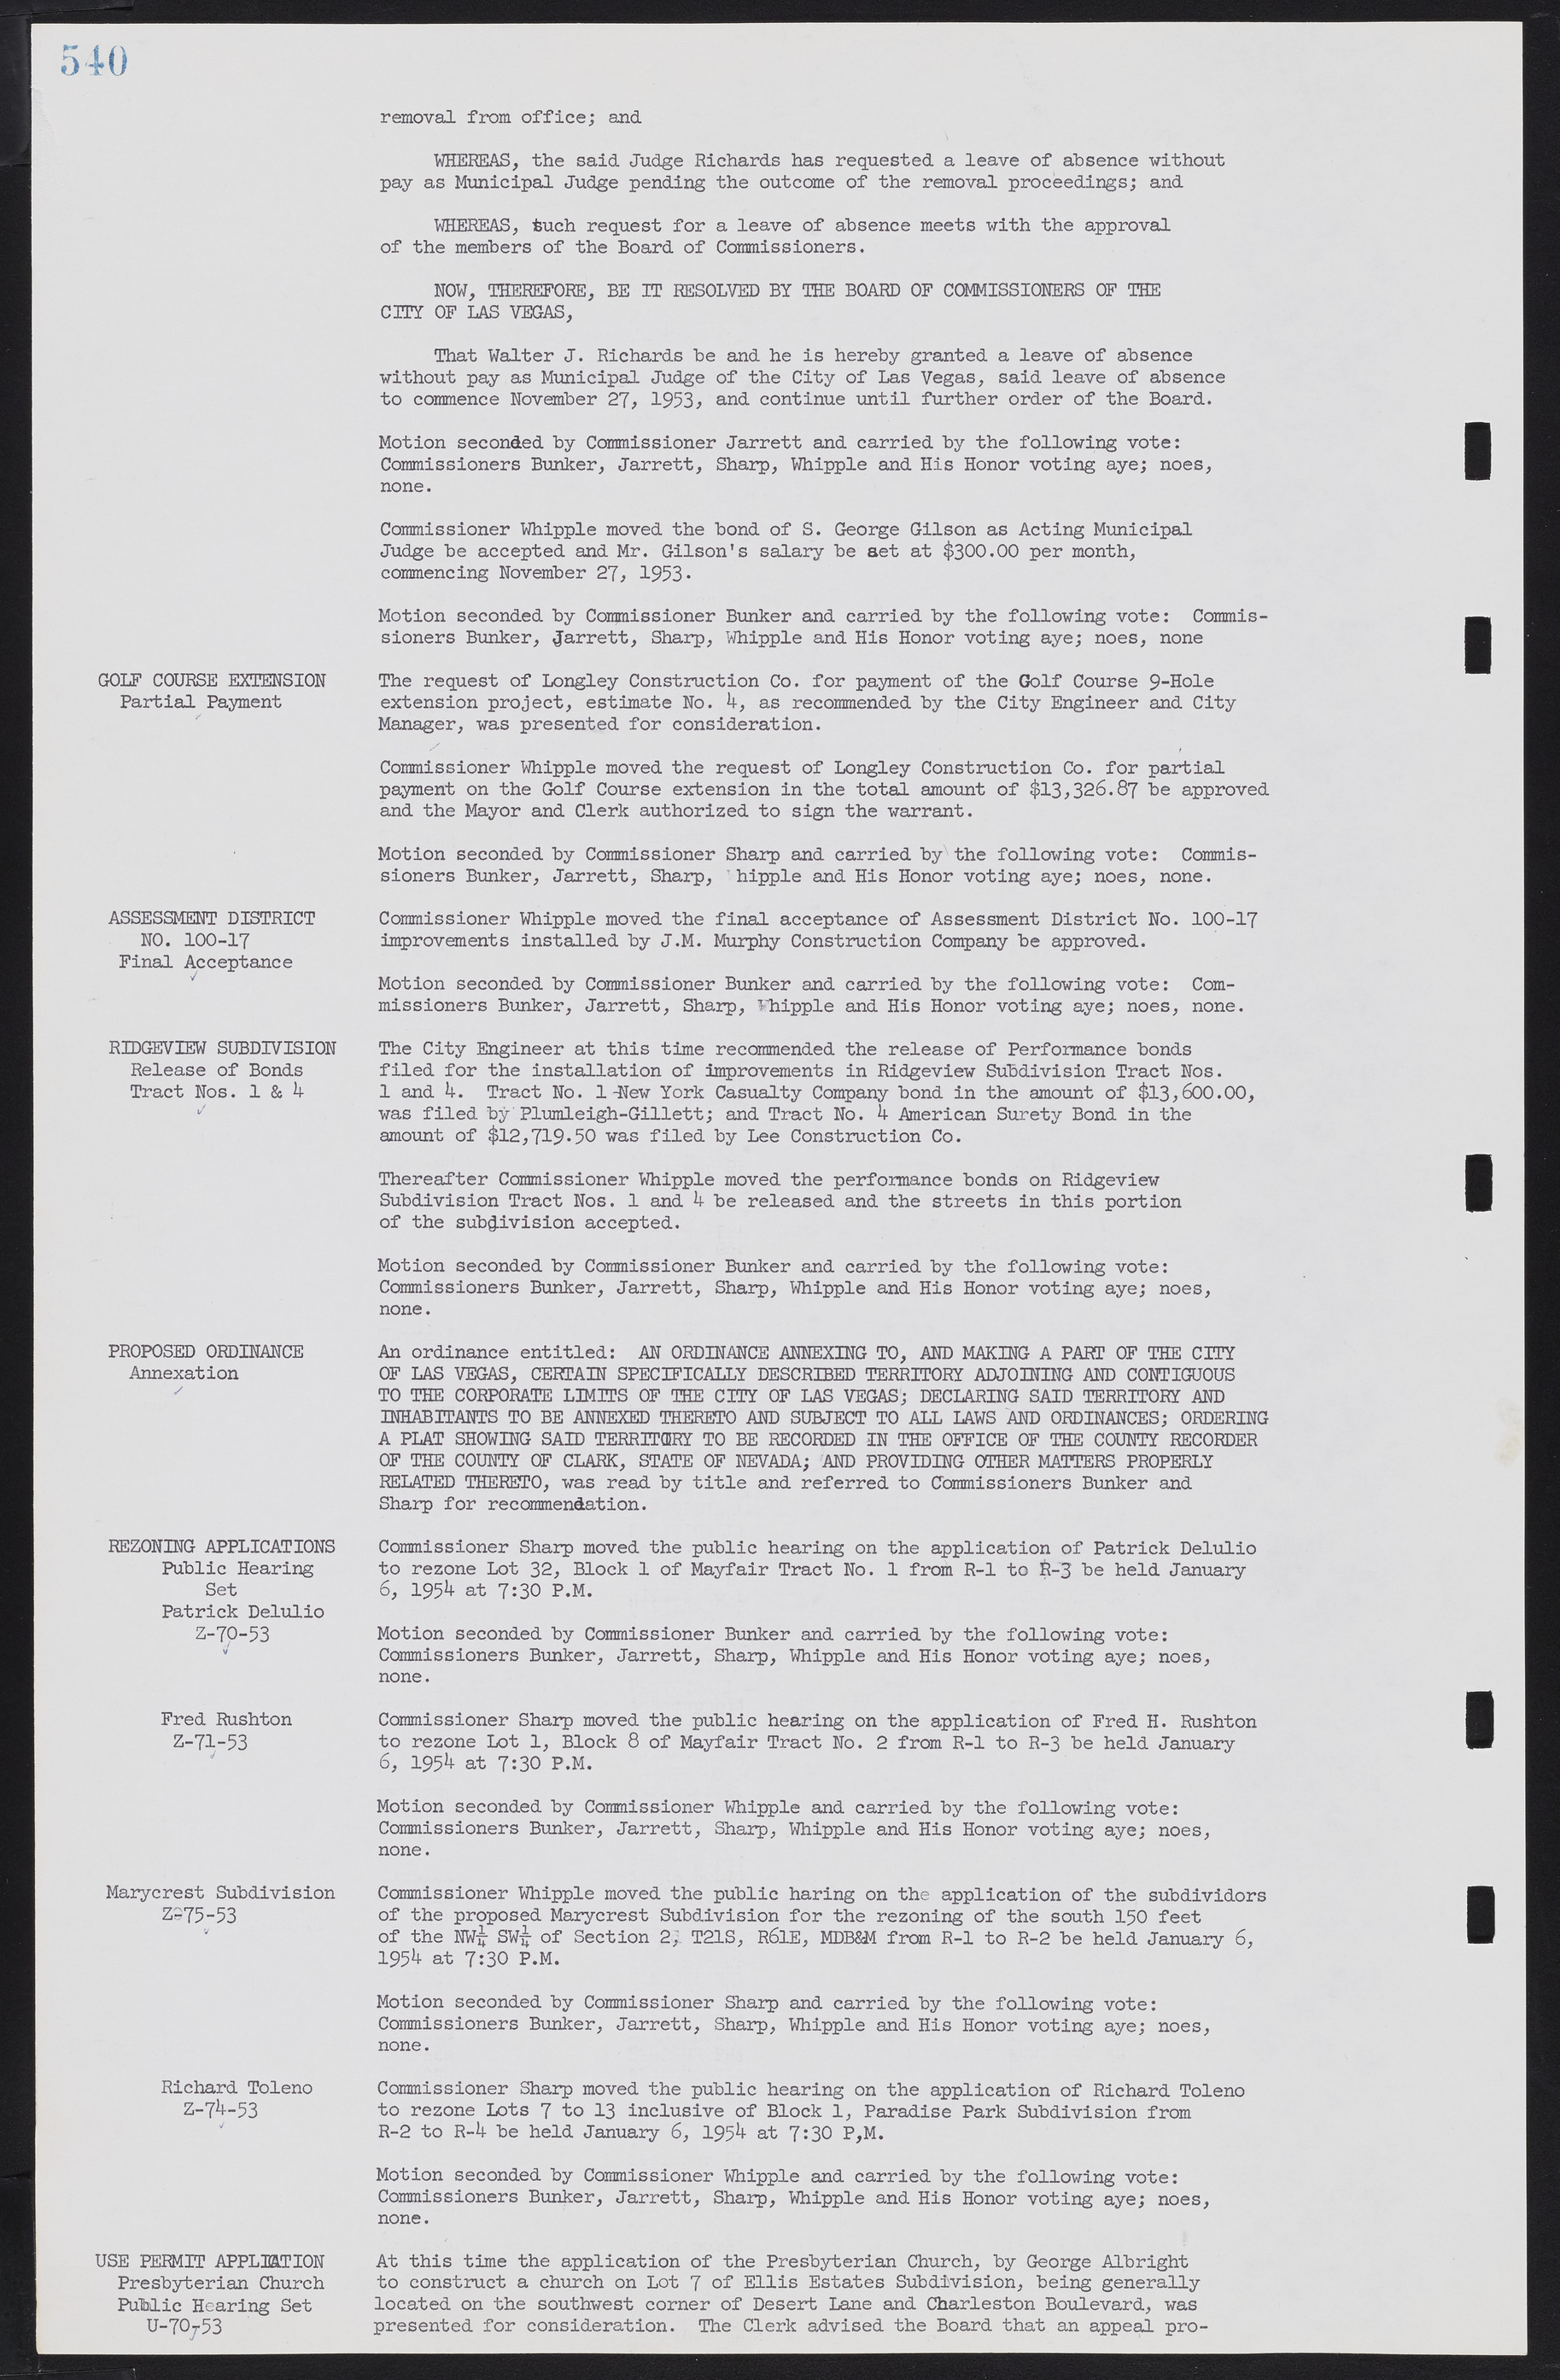 Las Vegas City Commission Minutes, May 26, 1952 to February 17, 1954, lvc000008-570